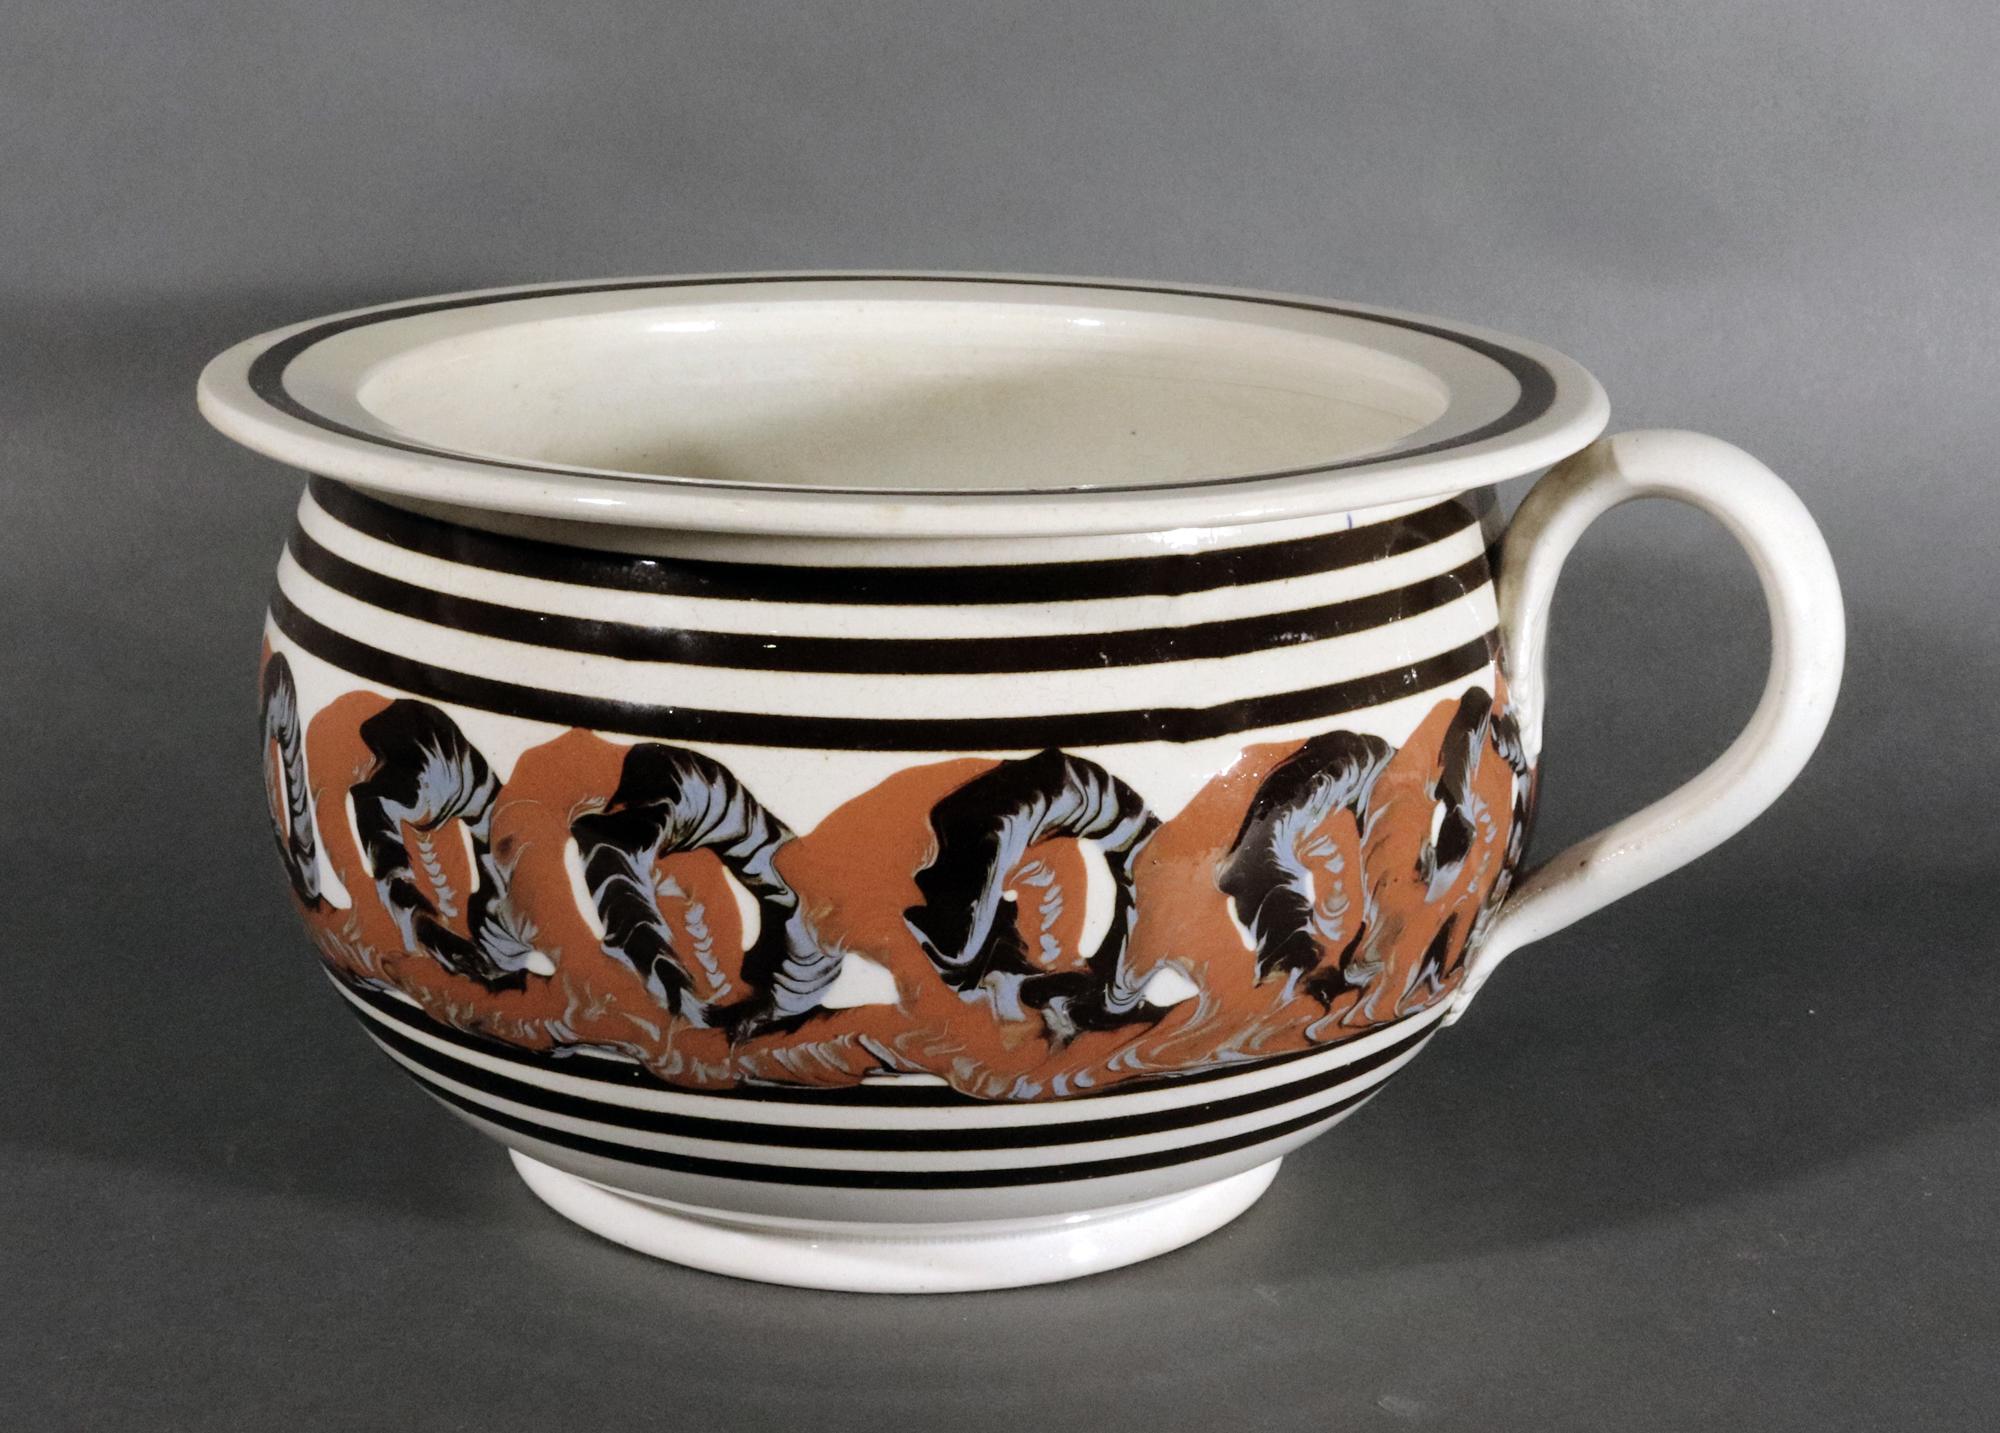 English Pottery Earthworm Mocha Chamber Pot,
Circa 1820

The circular mocha chamber pot is painted with a series of black and blue earthworm circles on a mirroring ochre red background in a band between continuous brown lines- three above and three